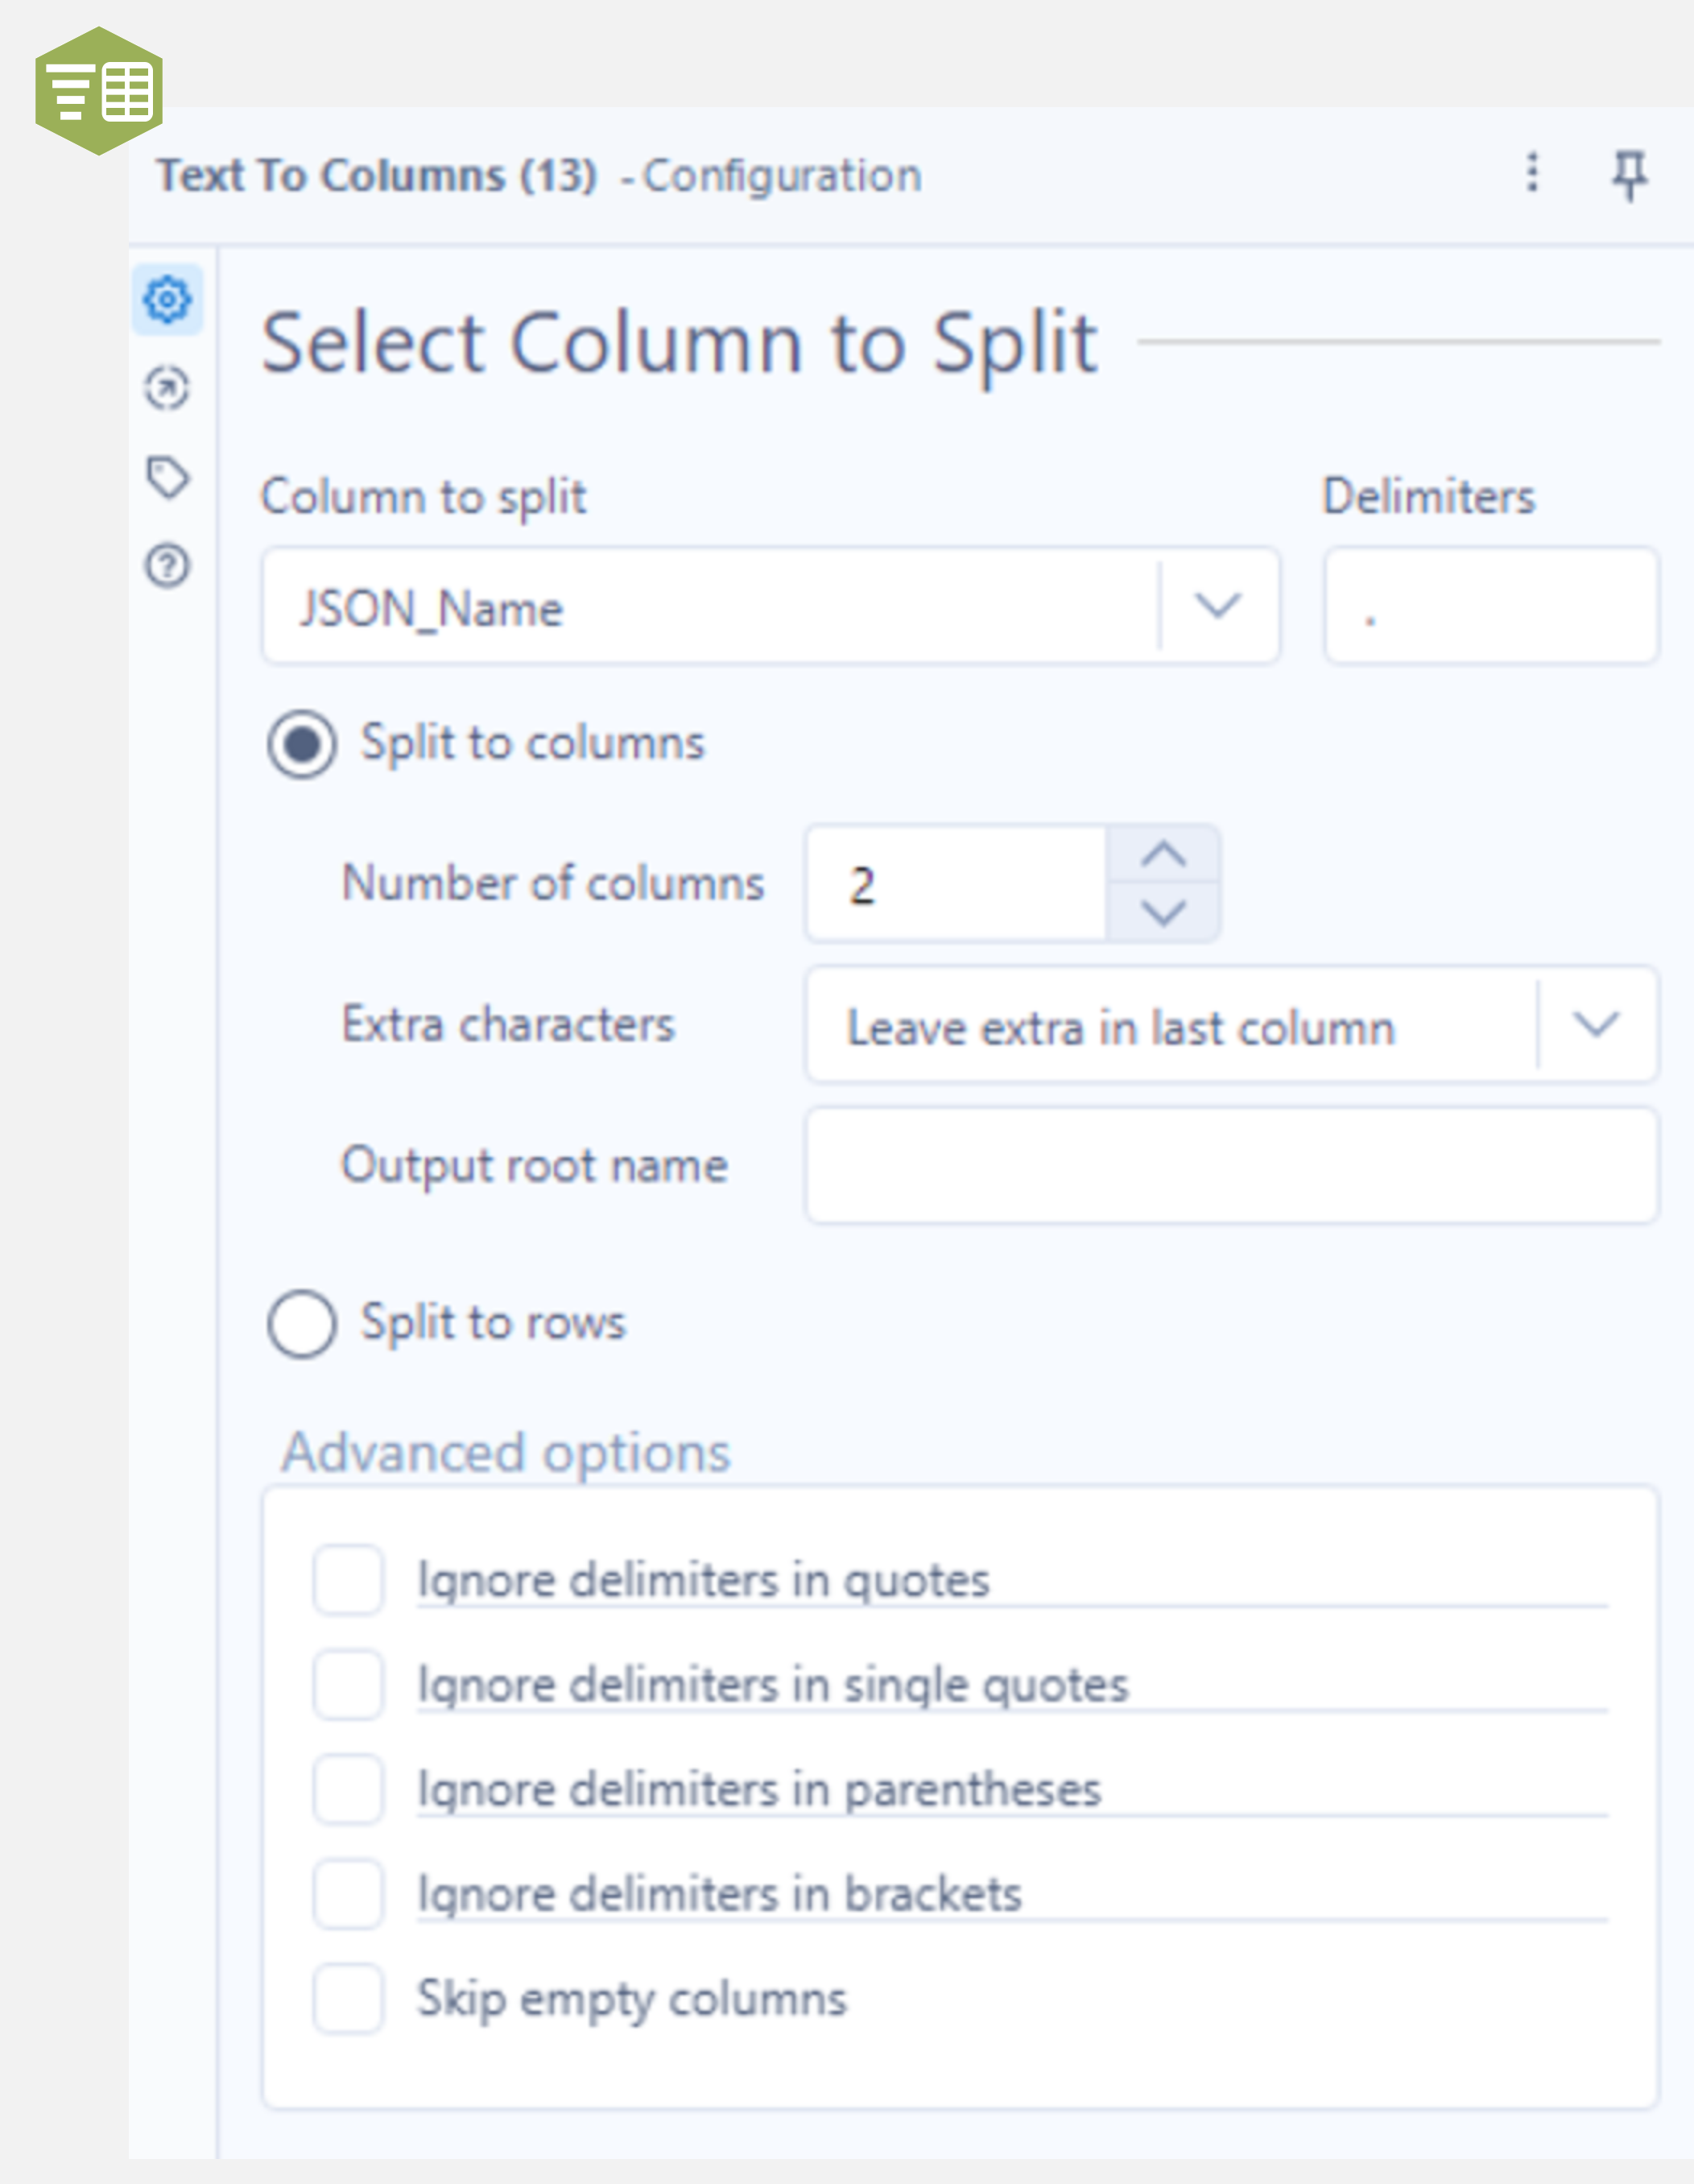 Text to Columns tool configuration panel